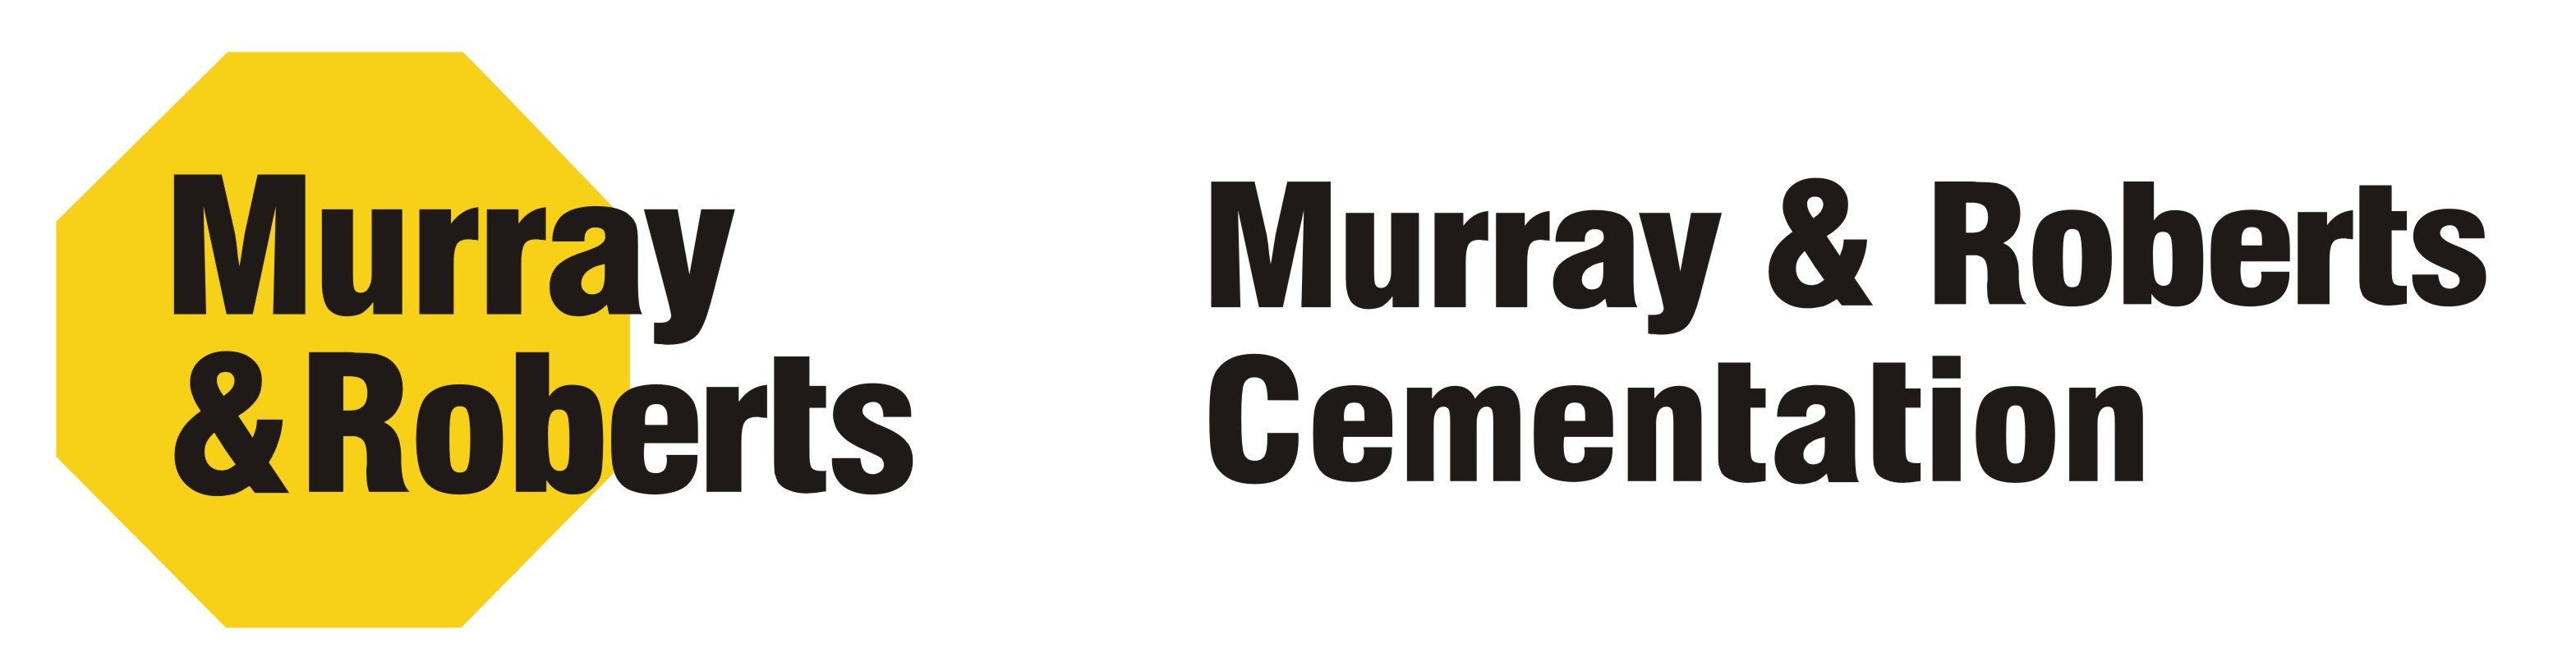 Murray & Roberts Cementation (Pty) Limited